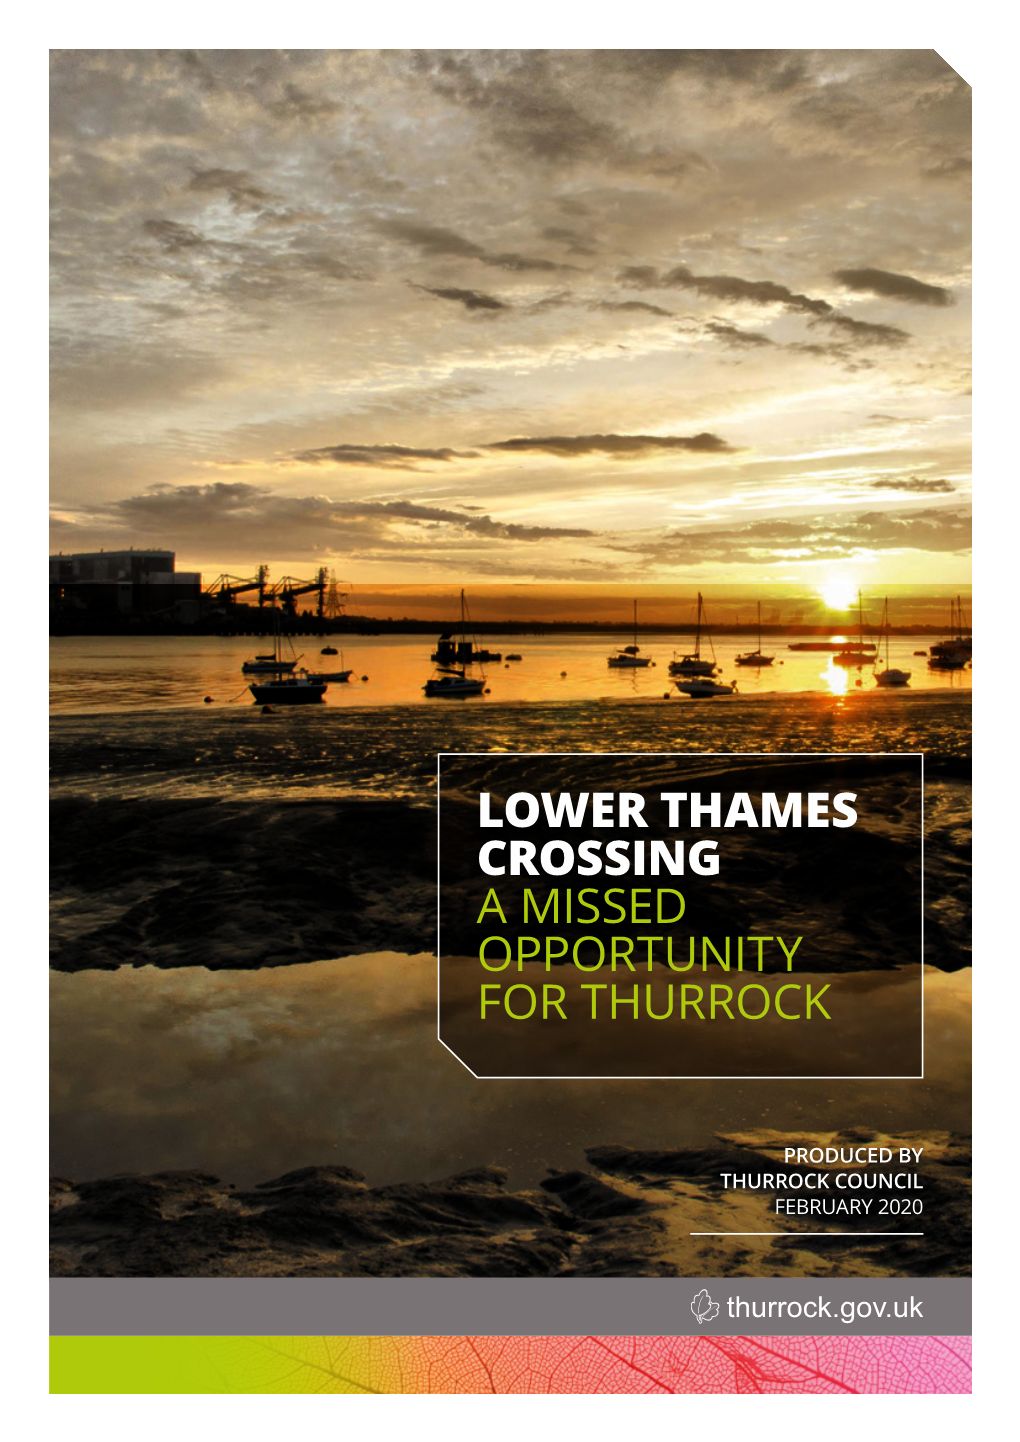 Lower Thames Crossing: Missed Opportunity